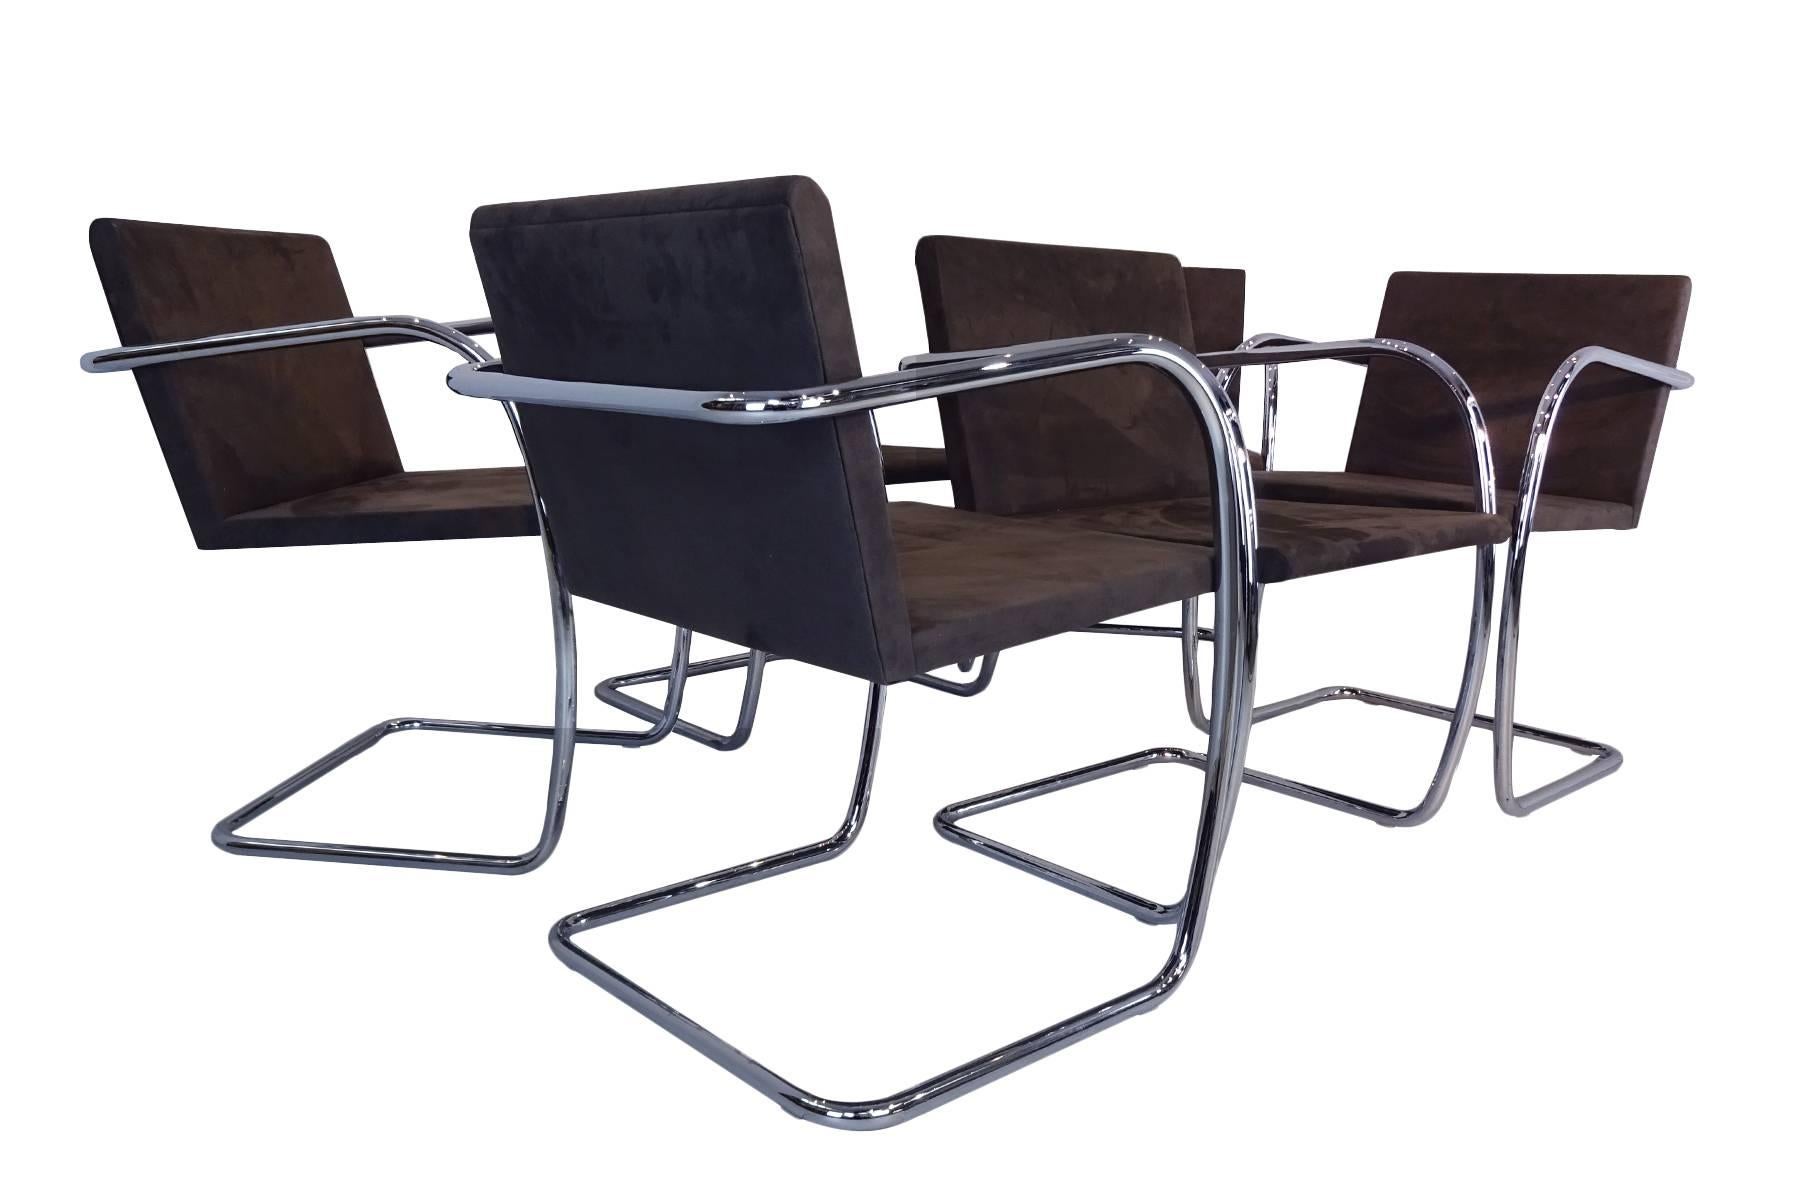 Designed by Ludwig Mies van der Rohe at his Tugendhat House in Brno, Czech Republic, the Brno chair (model number MR50) reflects the ground breaking simplicity of van der Rohe’s design using a simple cantilever frame. There are two versions of the